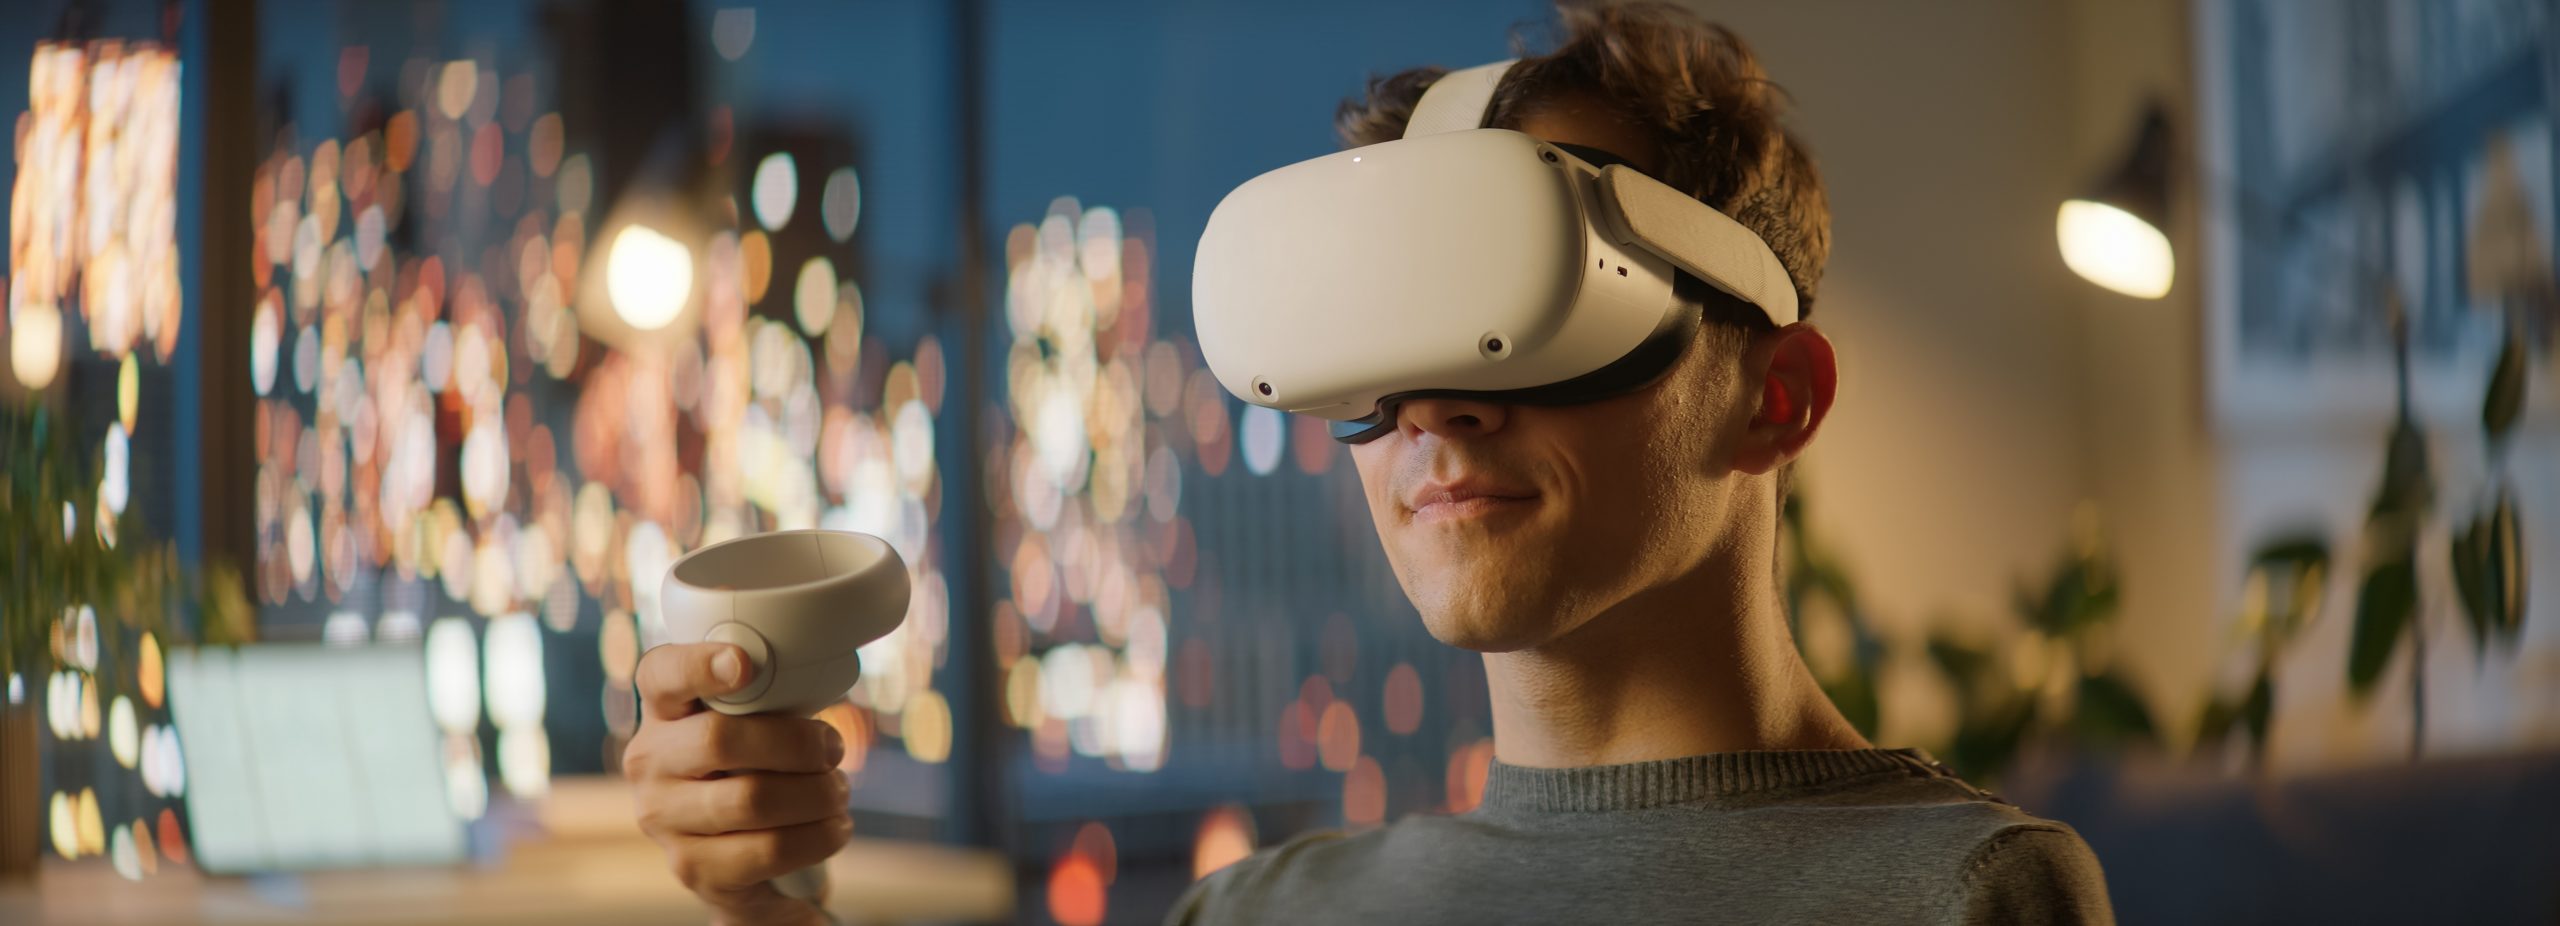 A person wearing a VR headset with a white controller in their right hand.